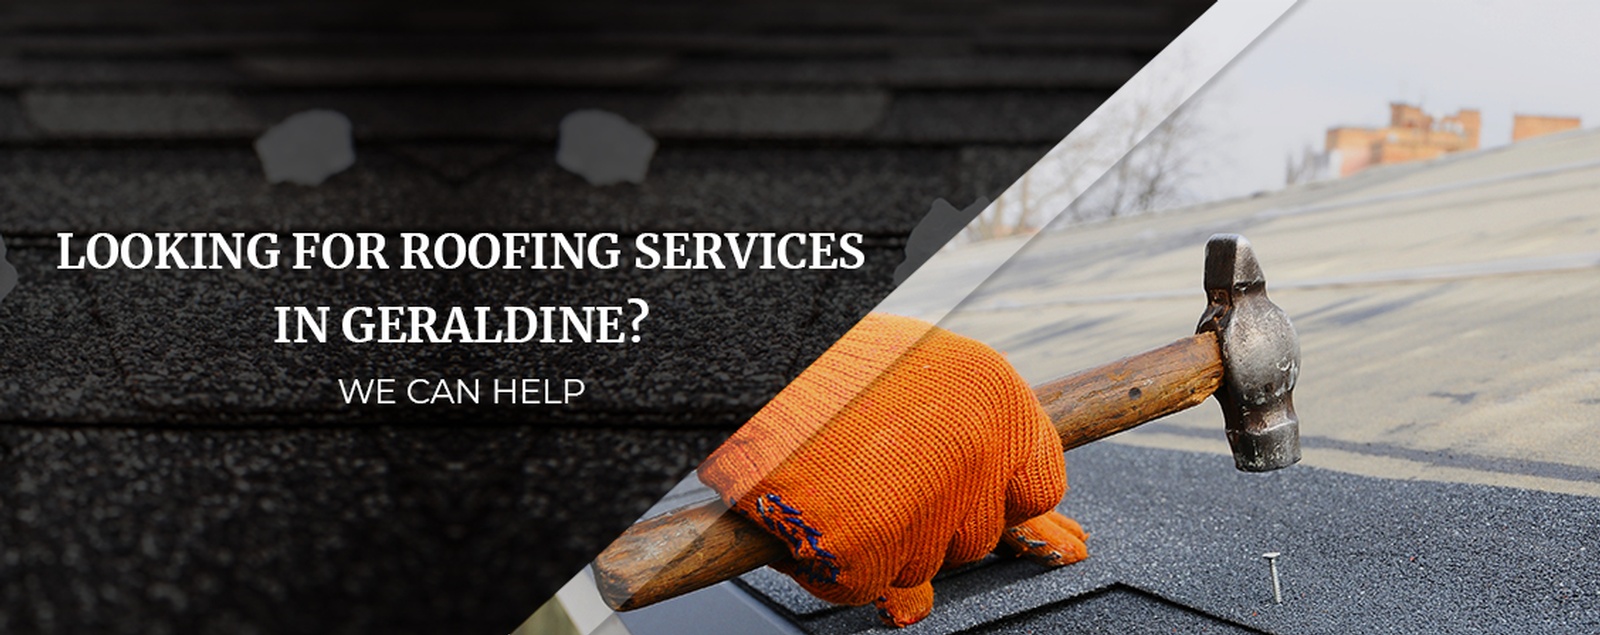 Looking For Roofing Services In Geraldine We Can Help